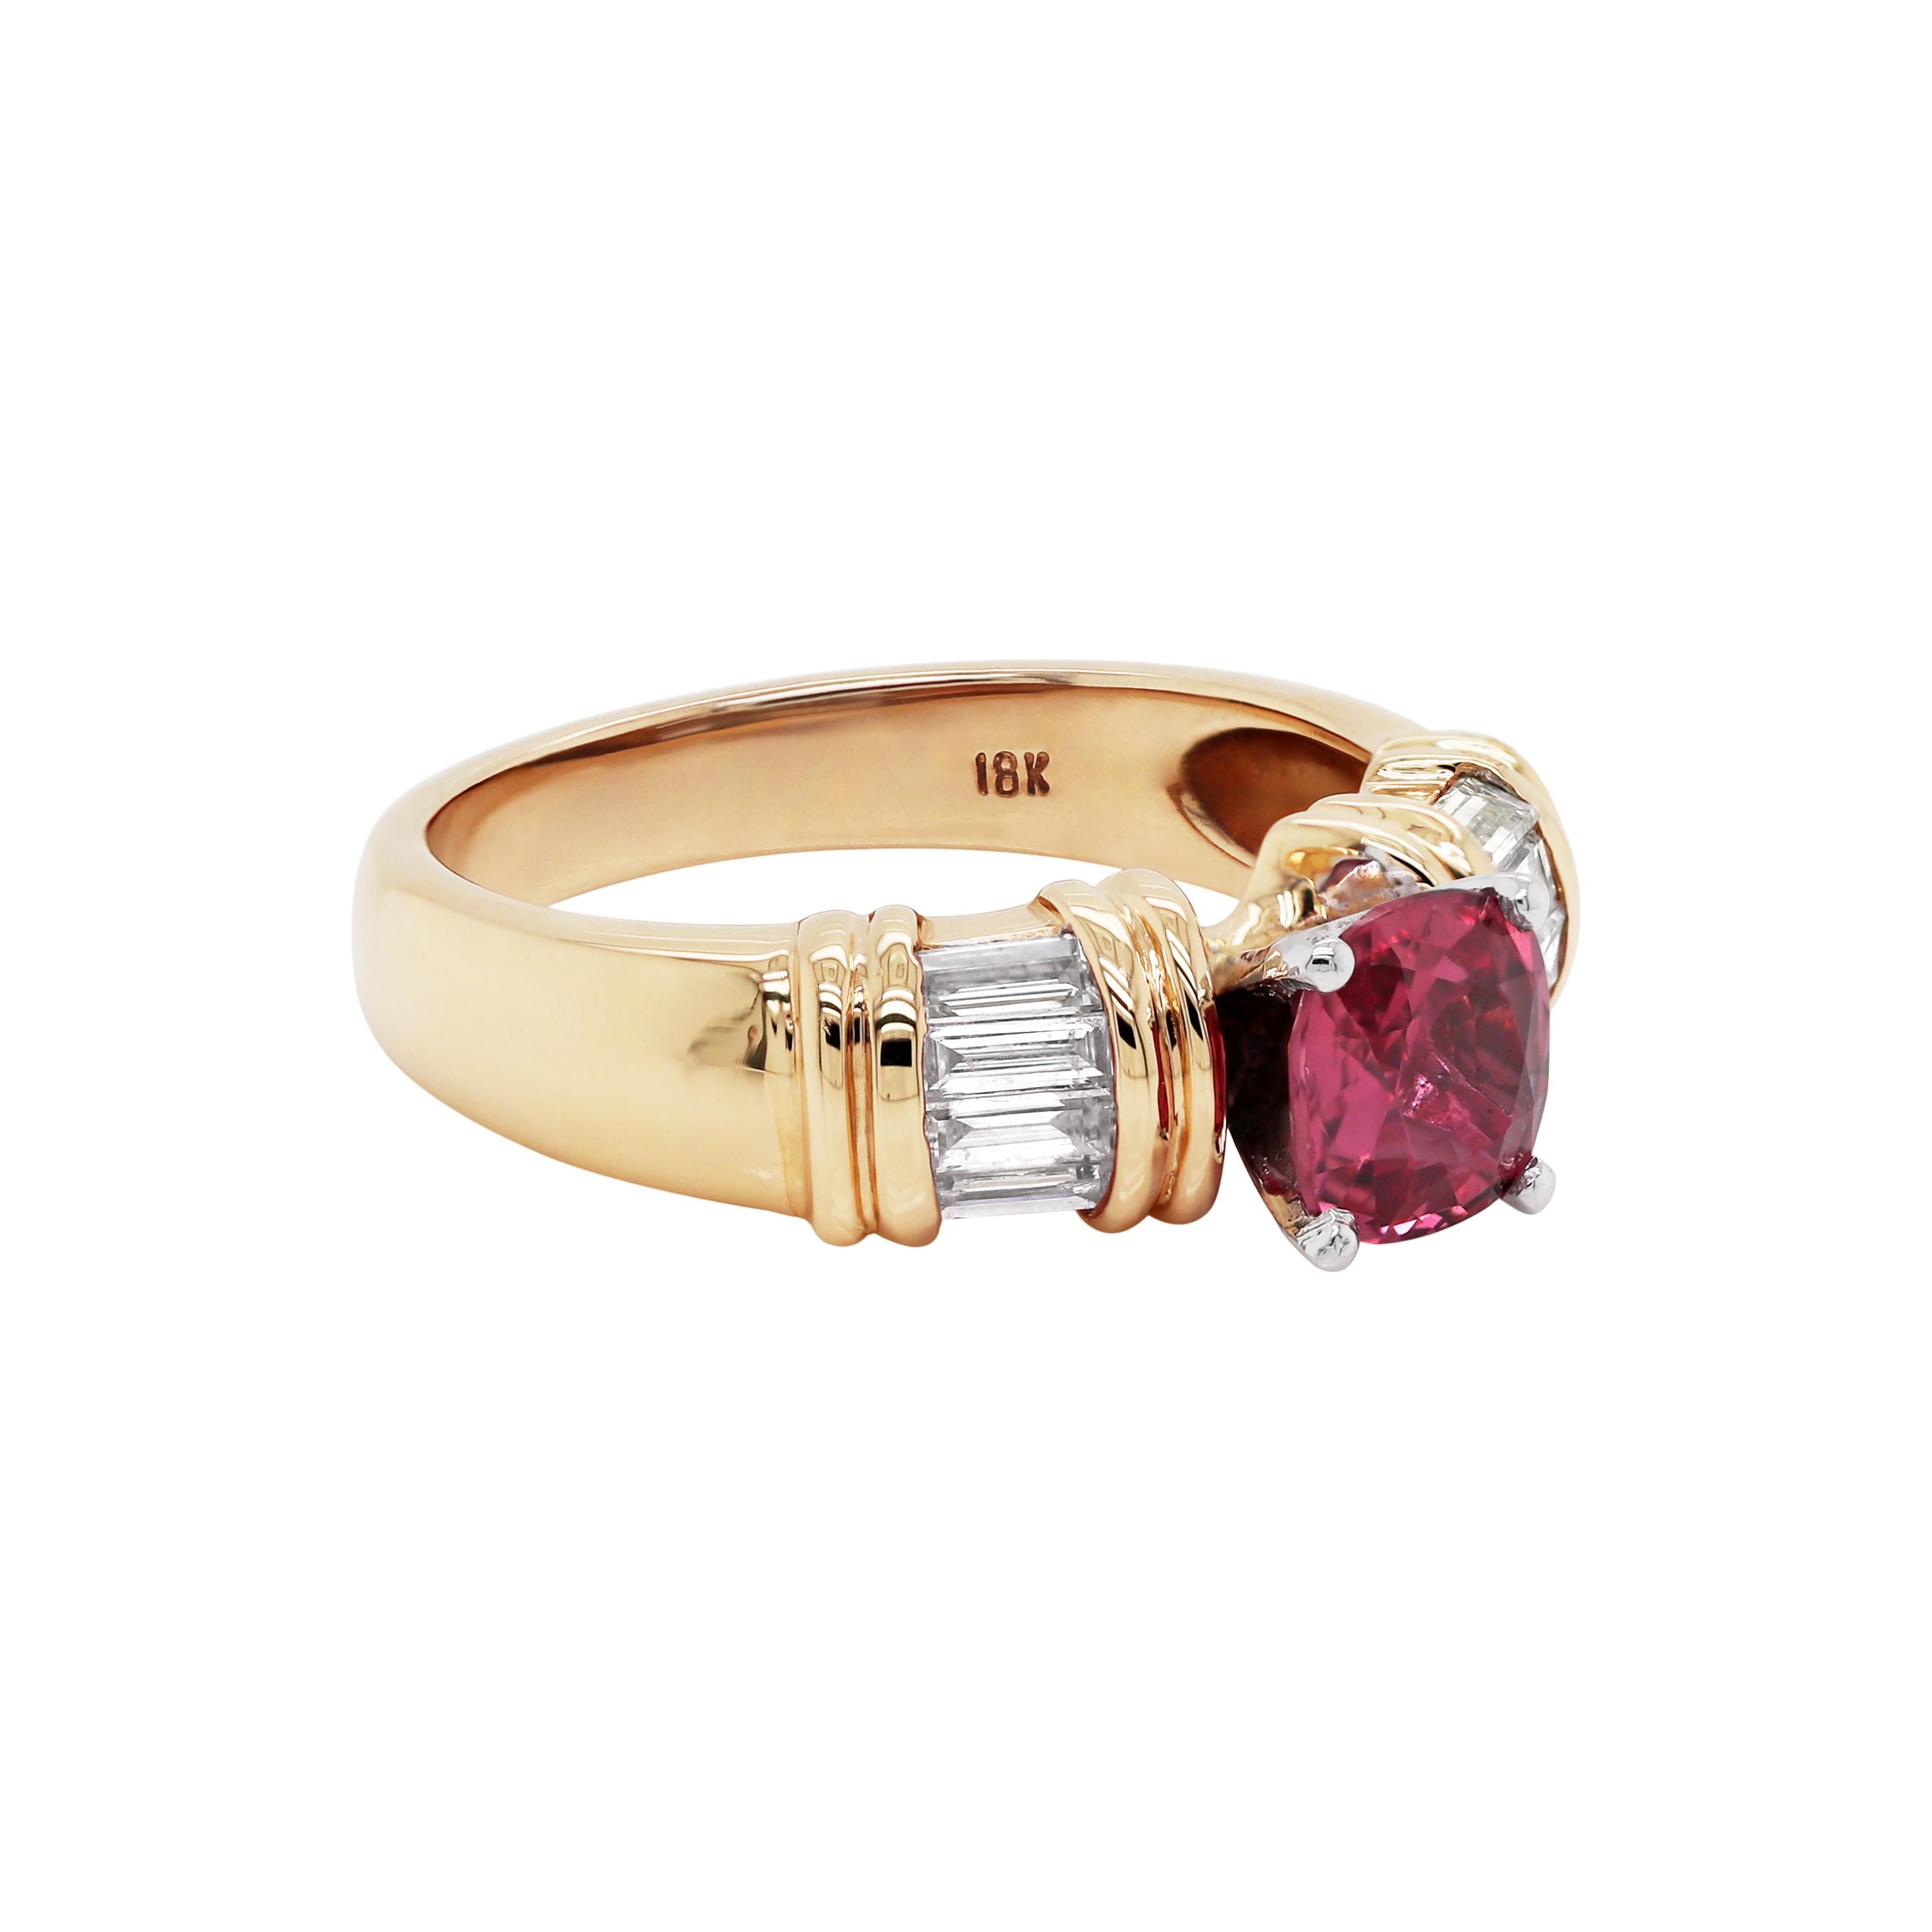 Beautiful 18 carat yellow gold ring featuring a cushion shaped pink sapphire in the centre, weighing a total of 1.01 carats, mounted in a four claw, open back setting. The sapphire is accompanied by four  channel set baguette cut diamonds on either